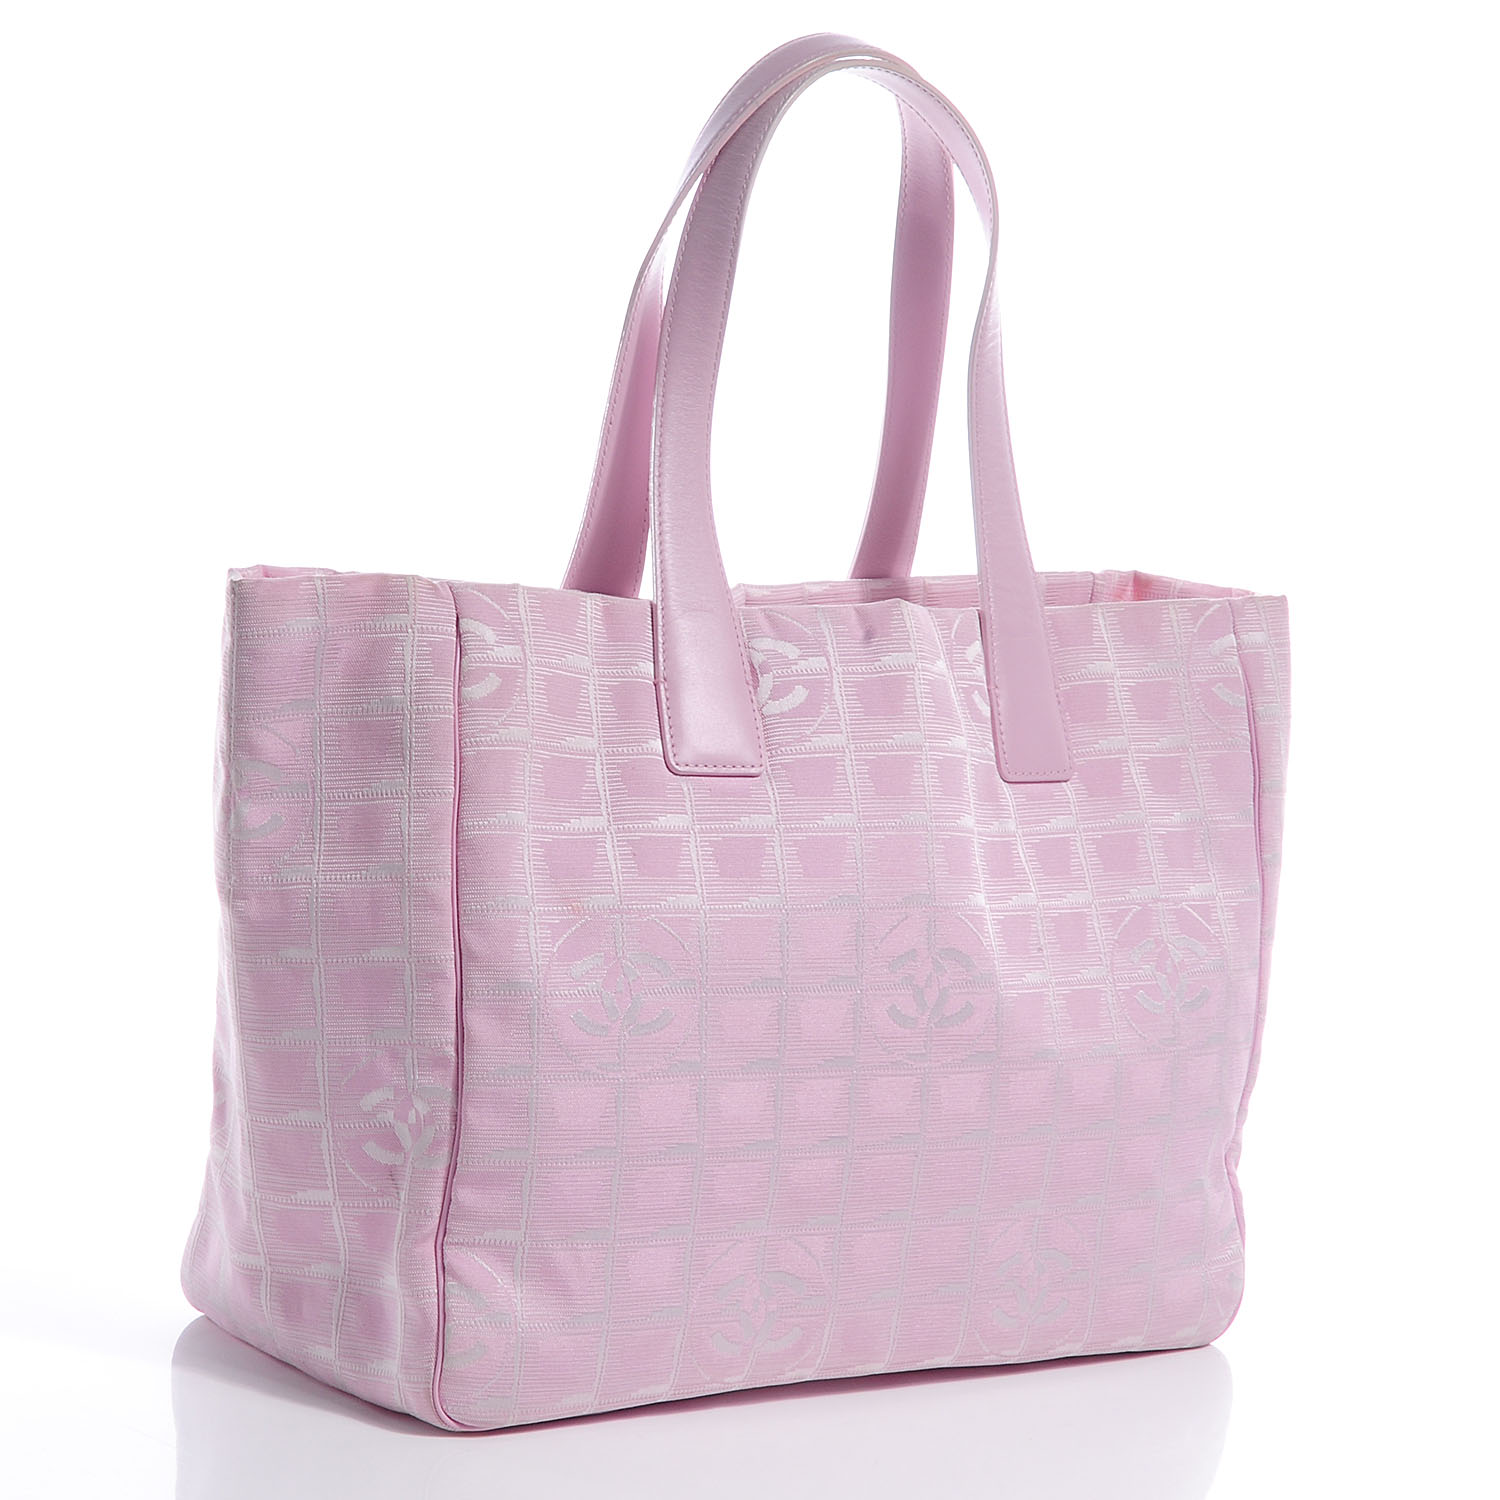 CHANEL Nylon Travel Large Tote Pink 63081